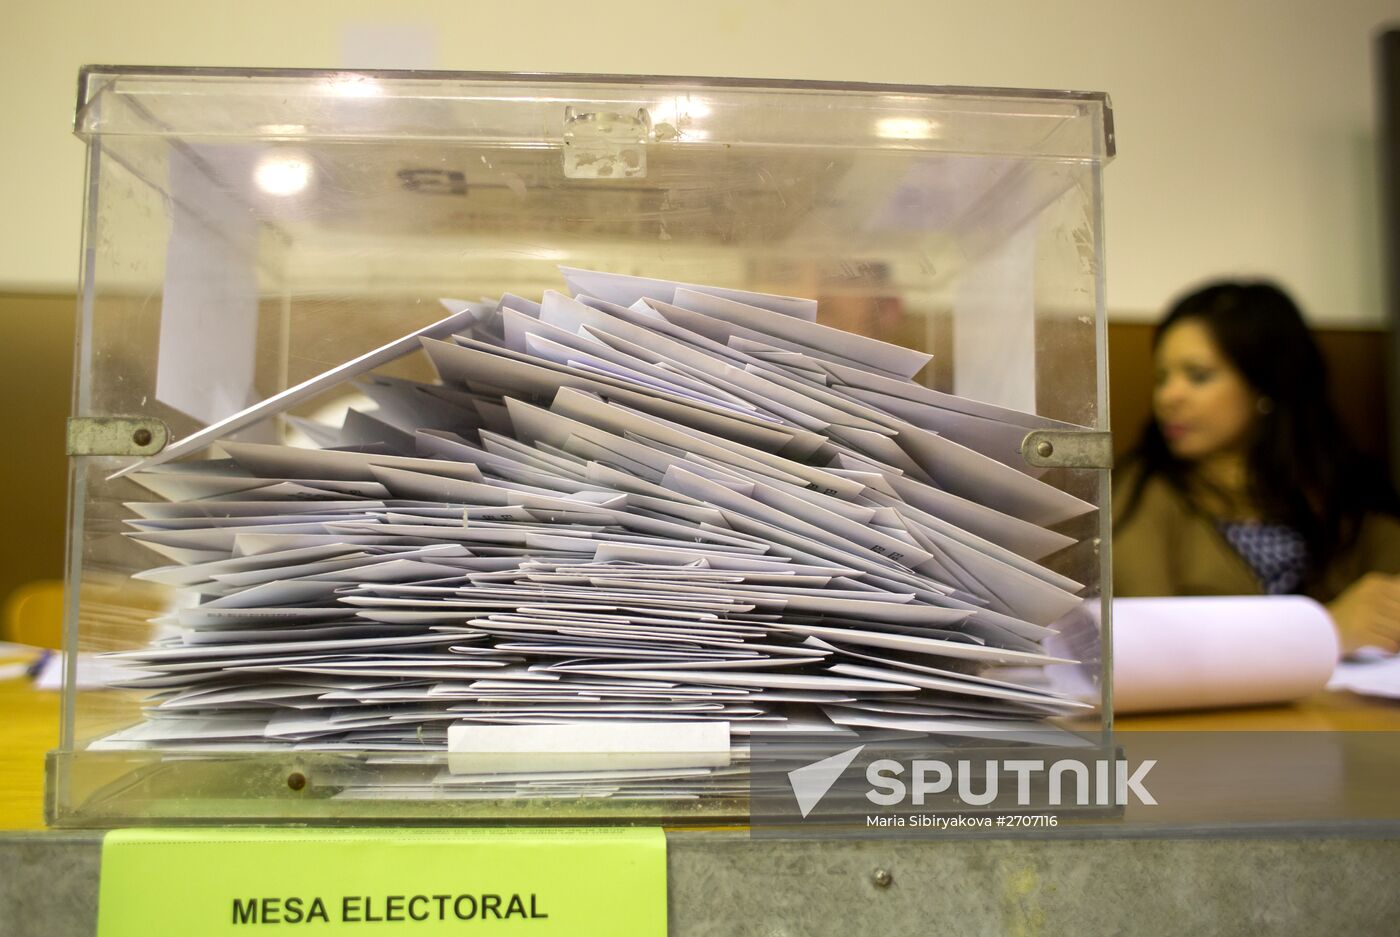 Early elections in Catalonia